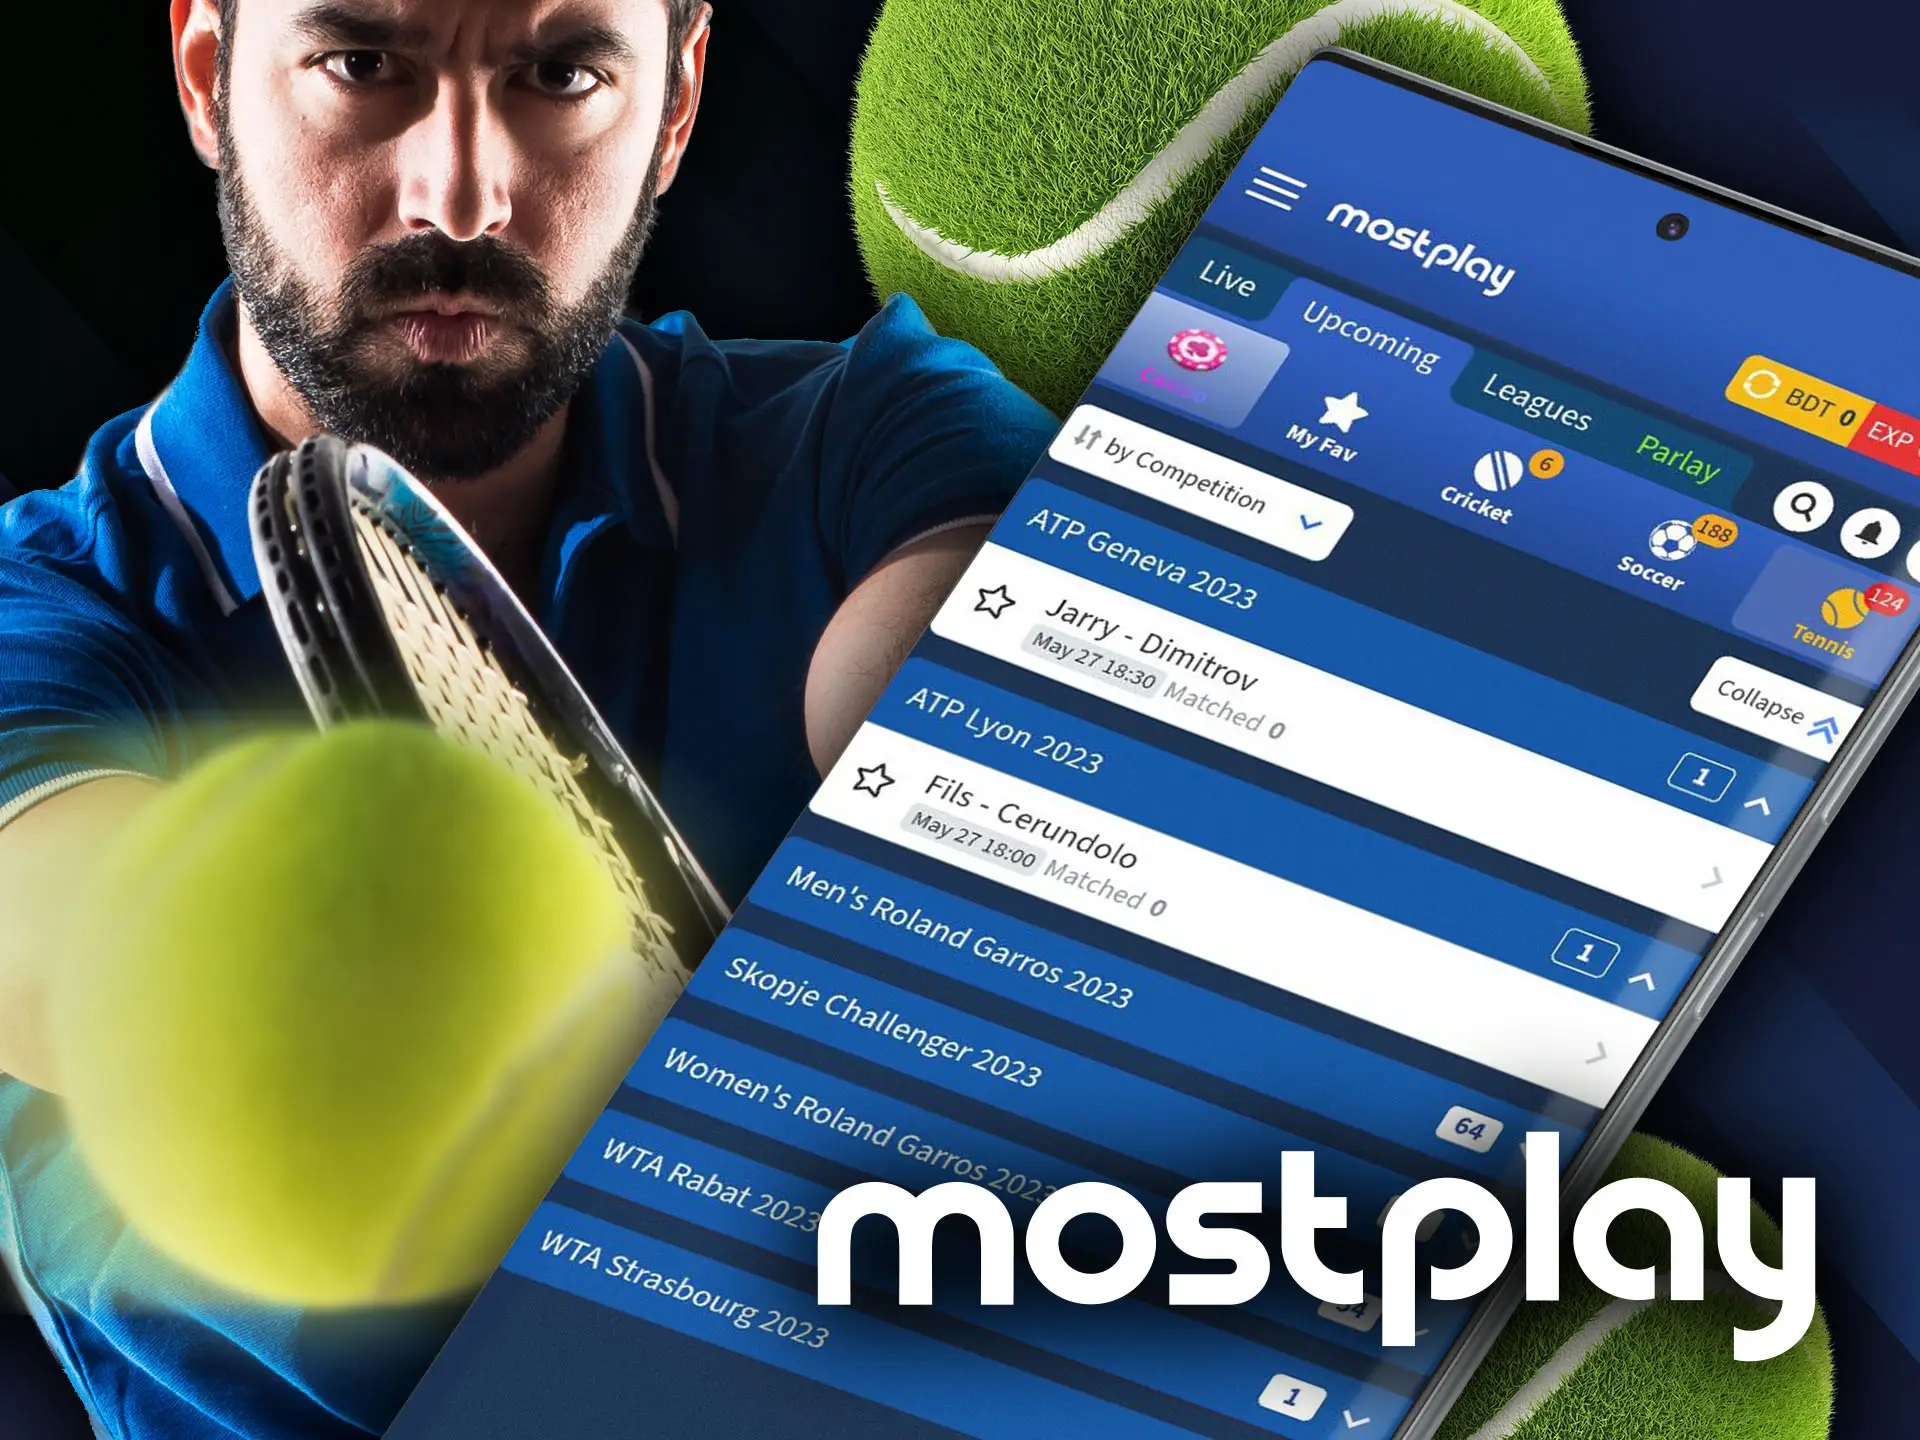 Bet on legendary tennis players at Mostplay.